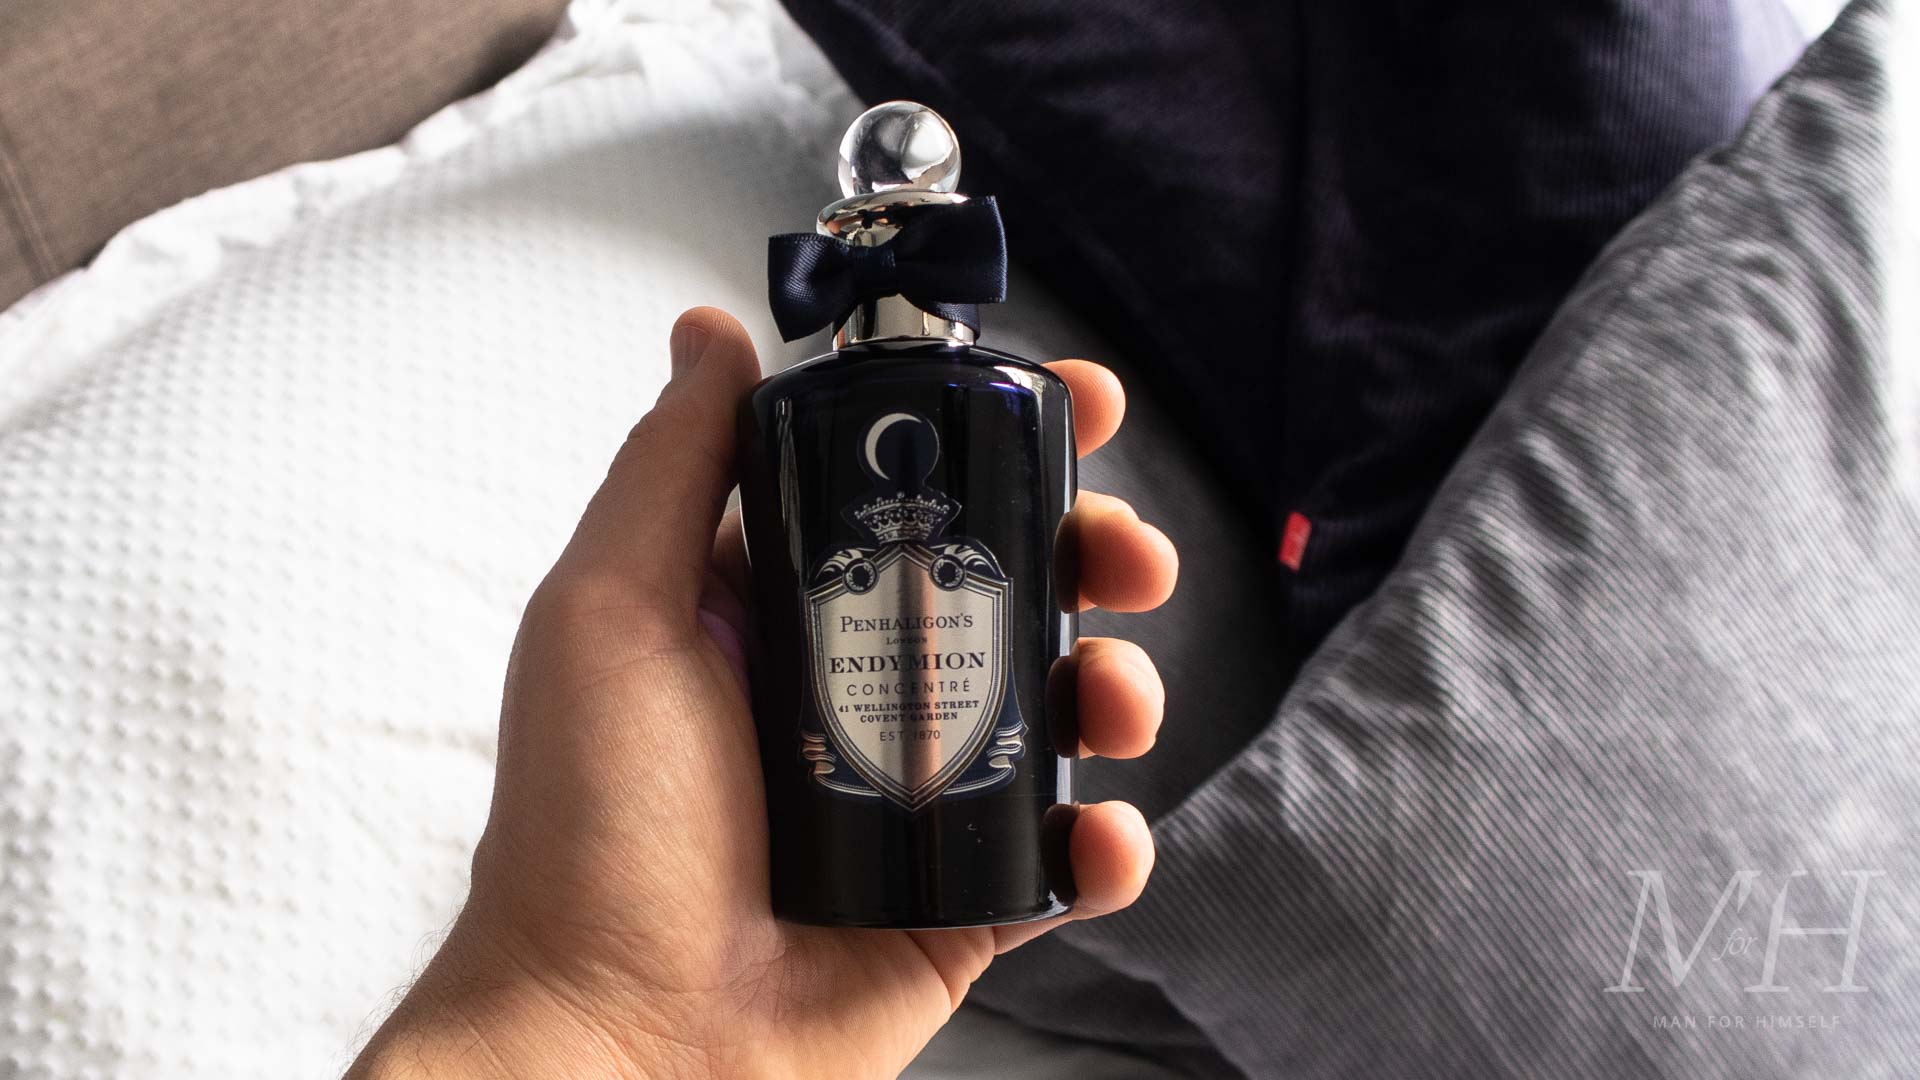 penhaligons-endymion-concentre-fragrance-grooming-product-review-man-for-himself-landscape